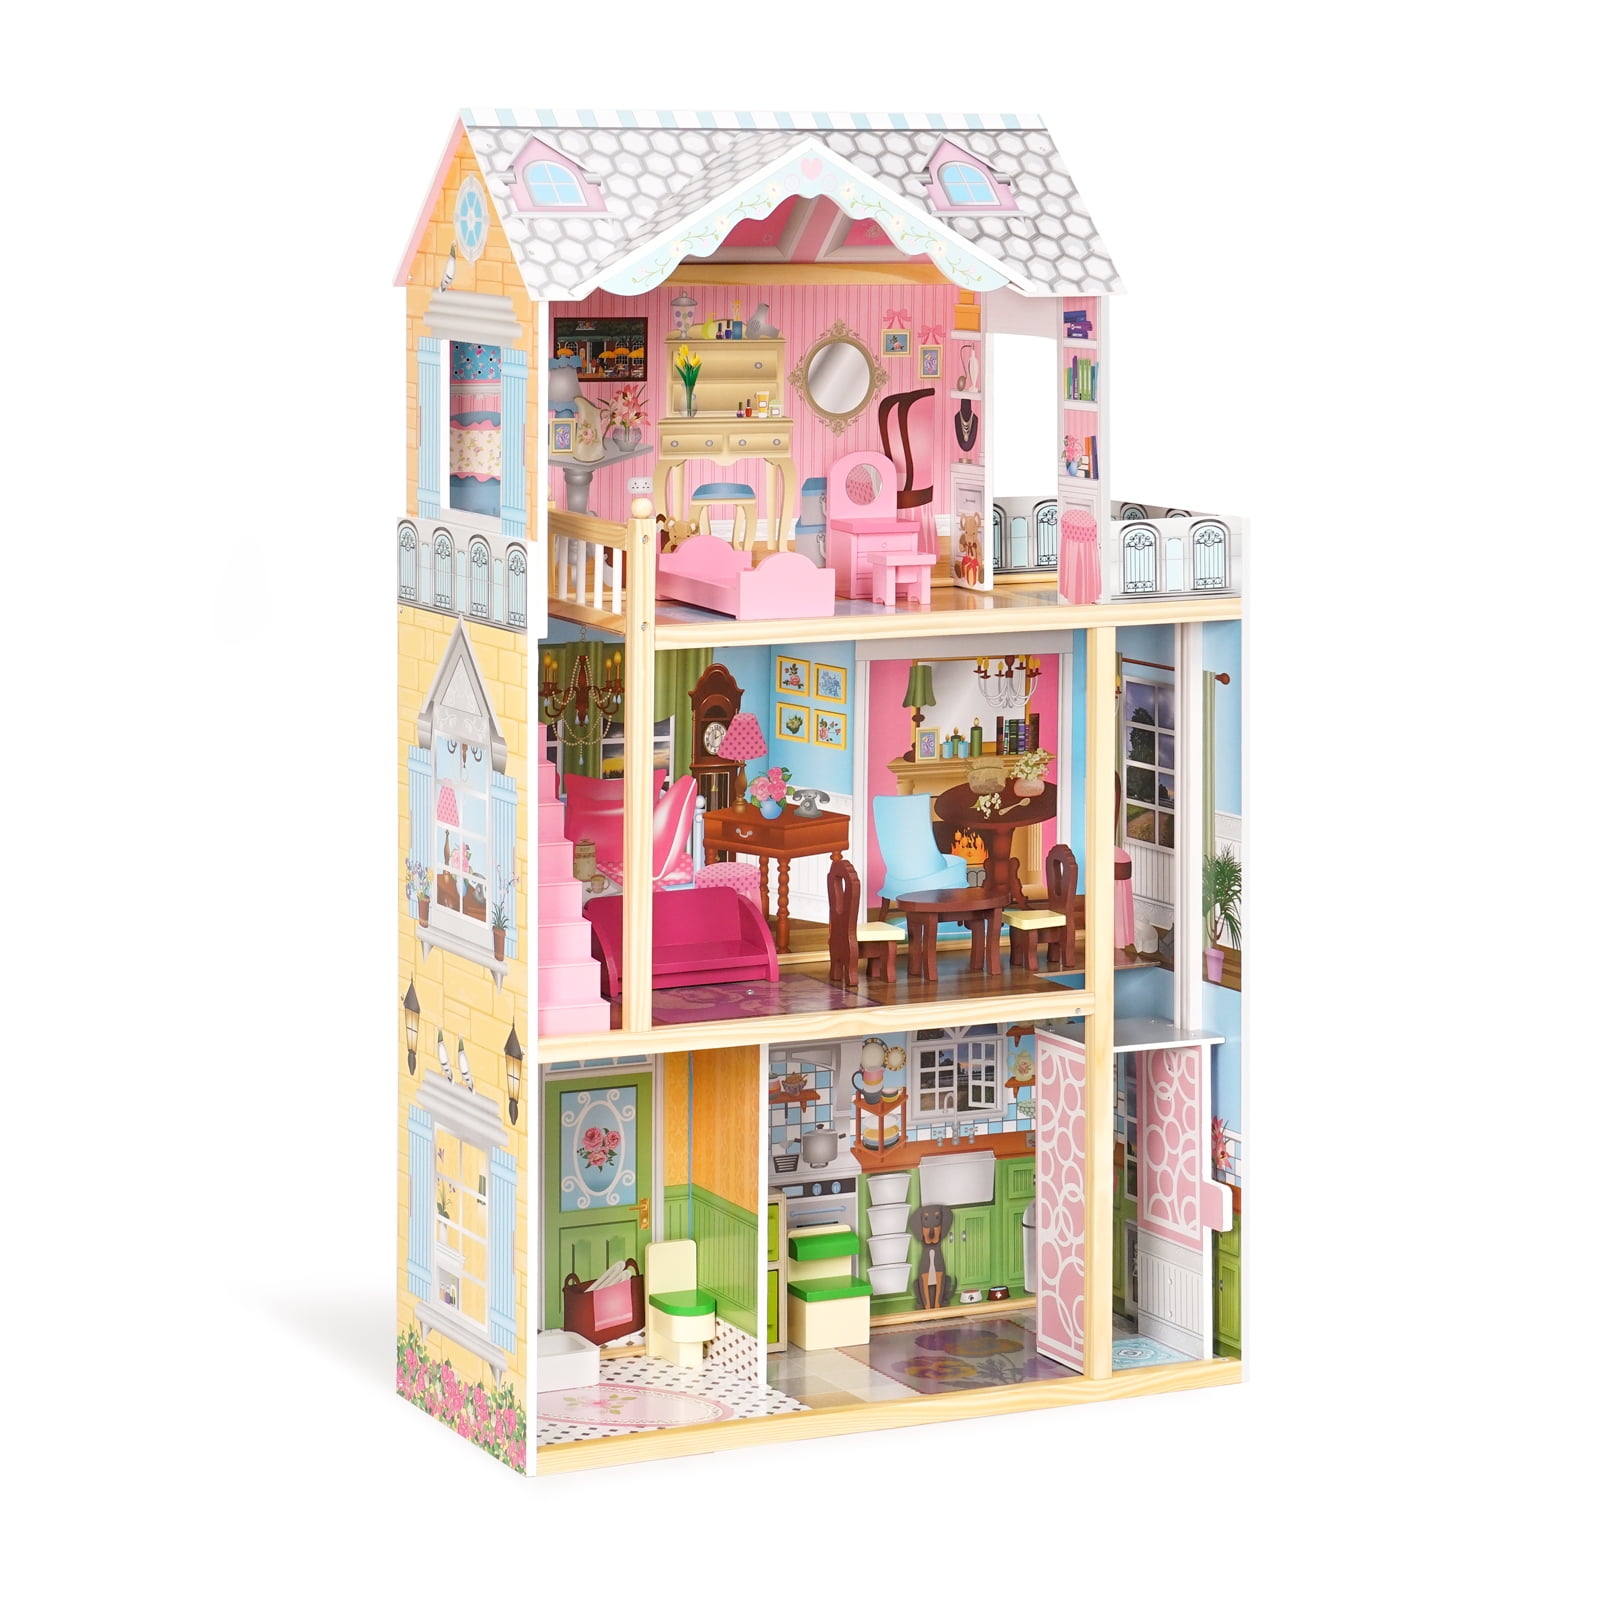 Dollhouse Dreamhouse Building Toy Set with 5 Lights,3 Dolls& 2 Pets  Princess Doll House and Furniture,Accessories,Stairway,Best STEM Pretend  Play Toys